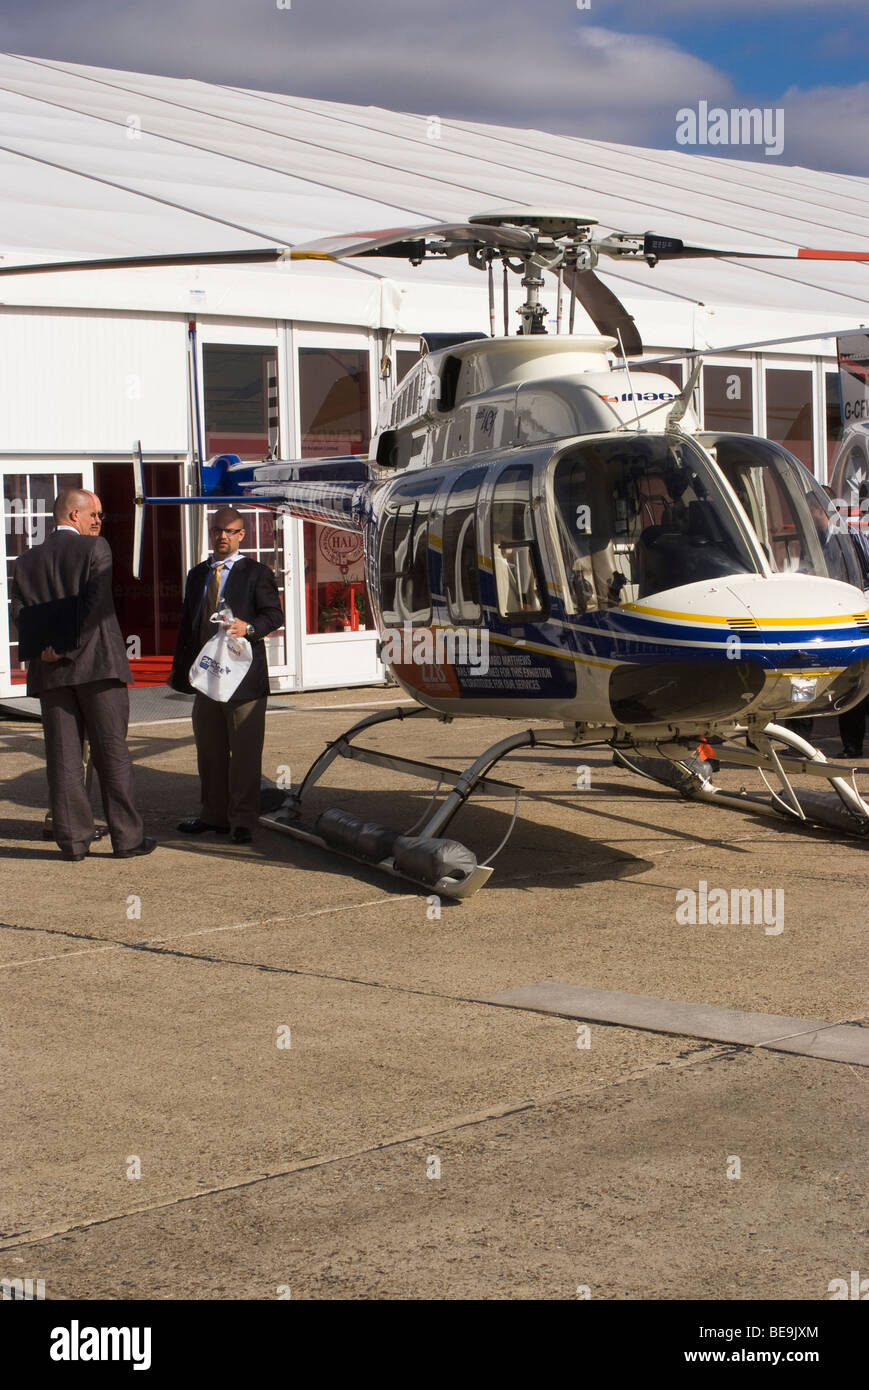 Bell Helicopters 407 Helicopter N120HH at Helitech Trade Show Duxford Aerodrome Cambridgeshire England United Kingdom UK Stock Photo